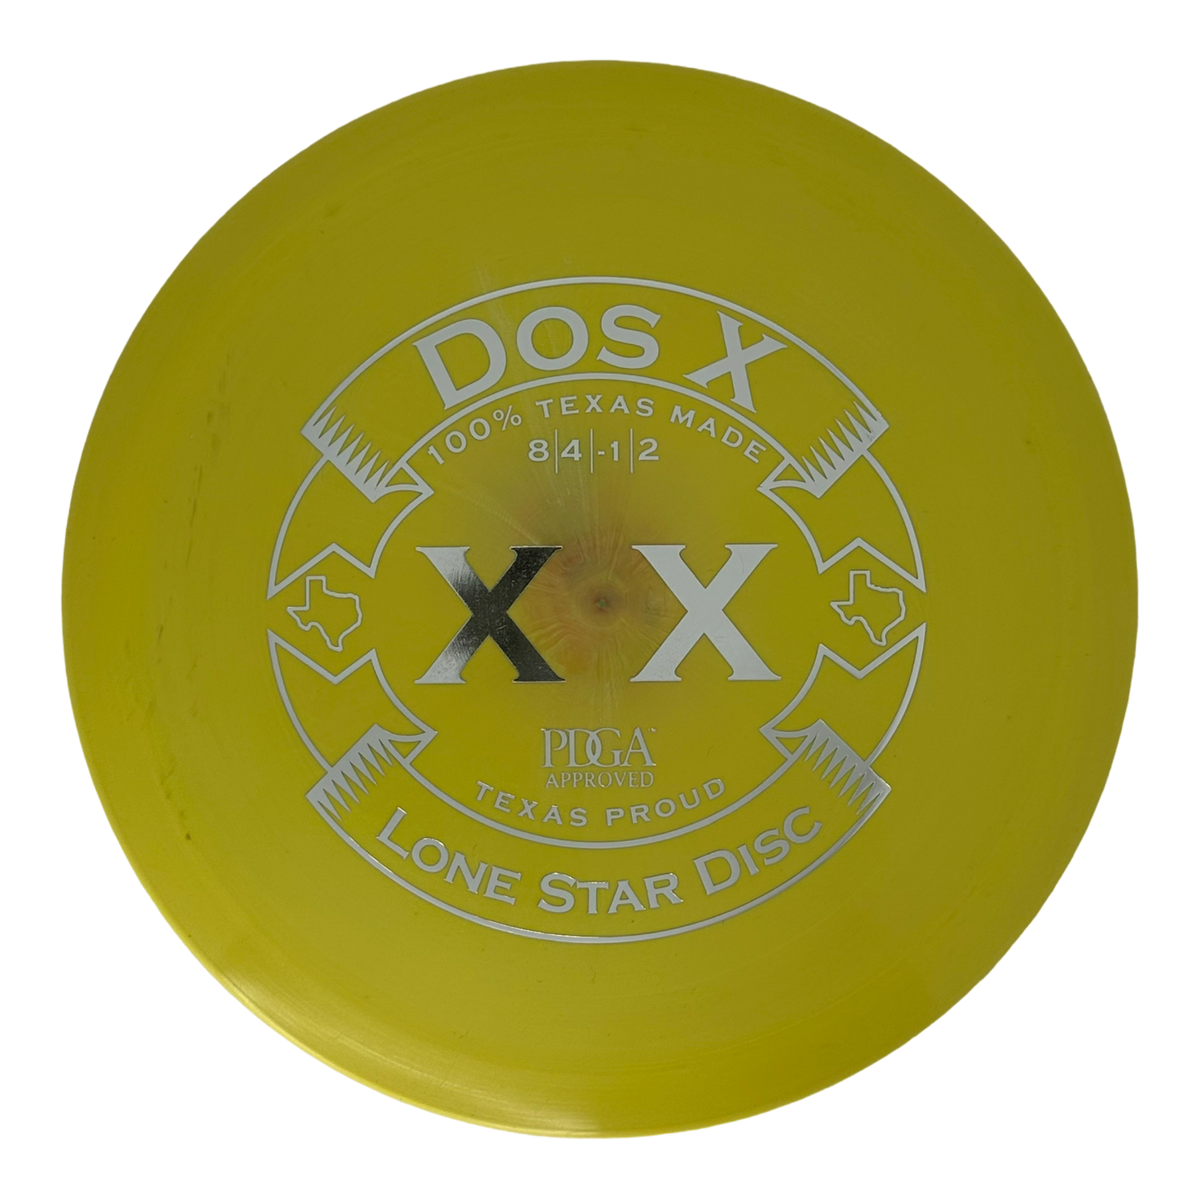 Lone Star Disc Lima Dos X - Double X